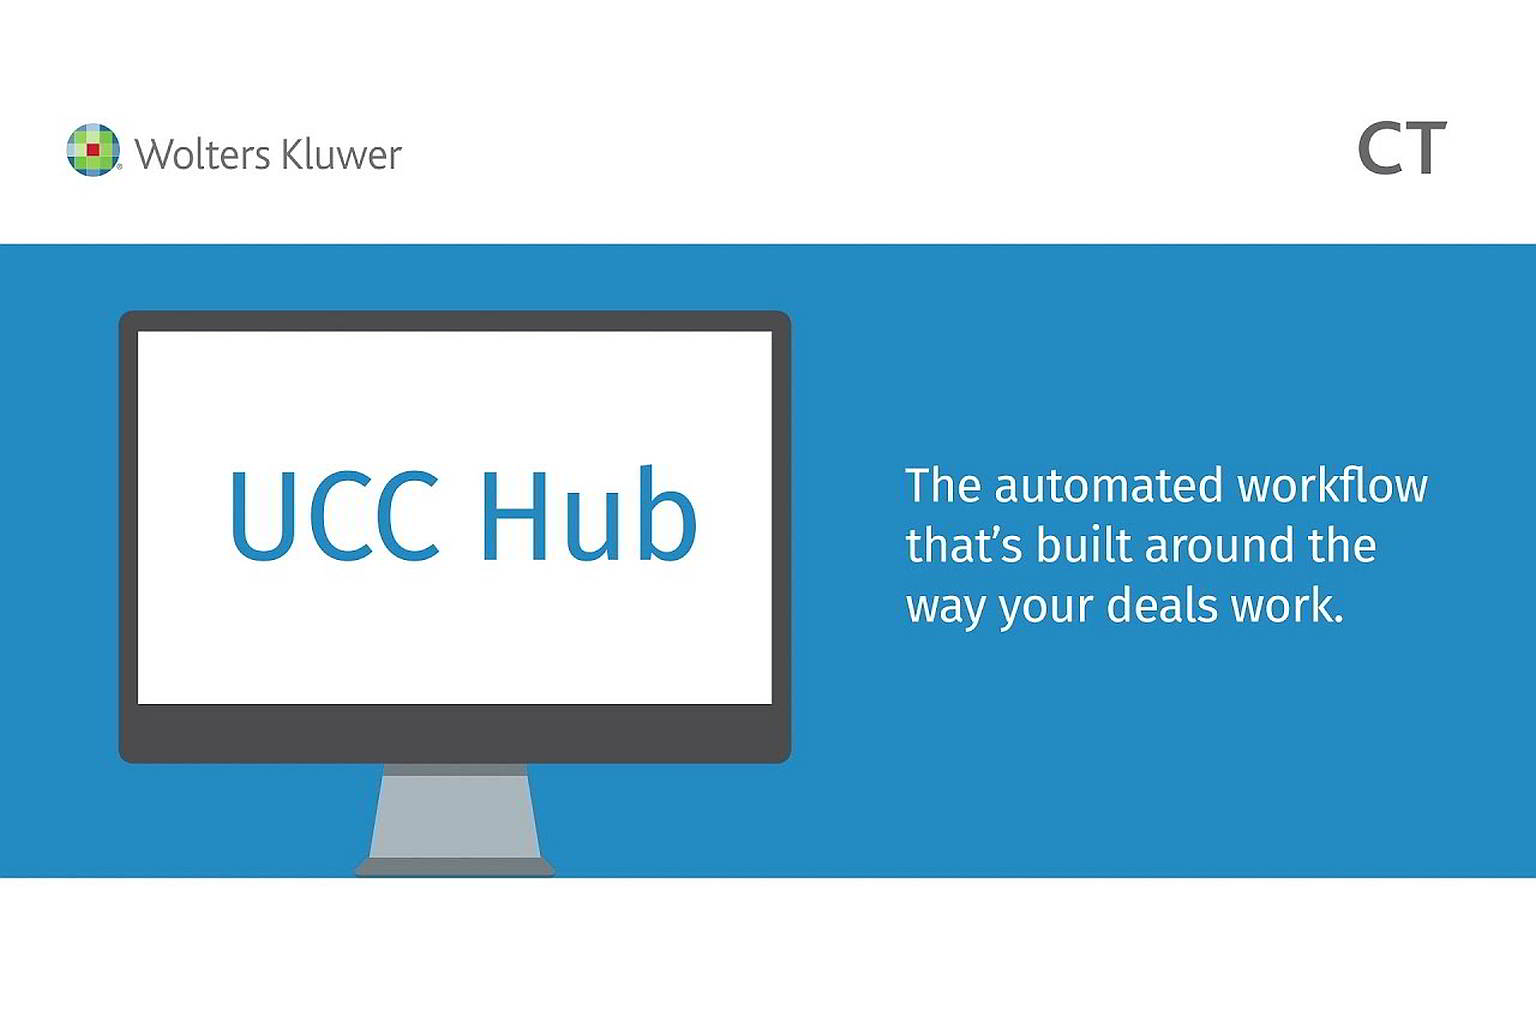 UCC Hub’s automated workflows can transform your business